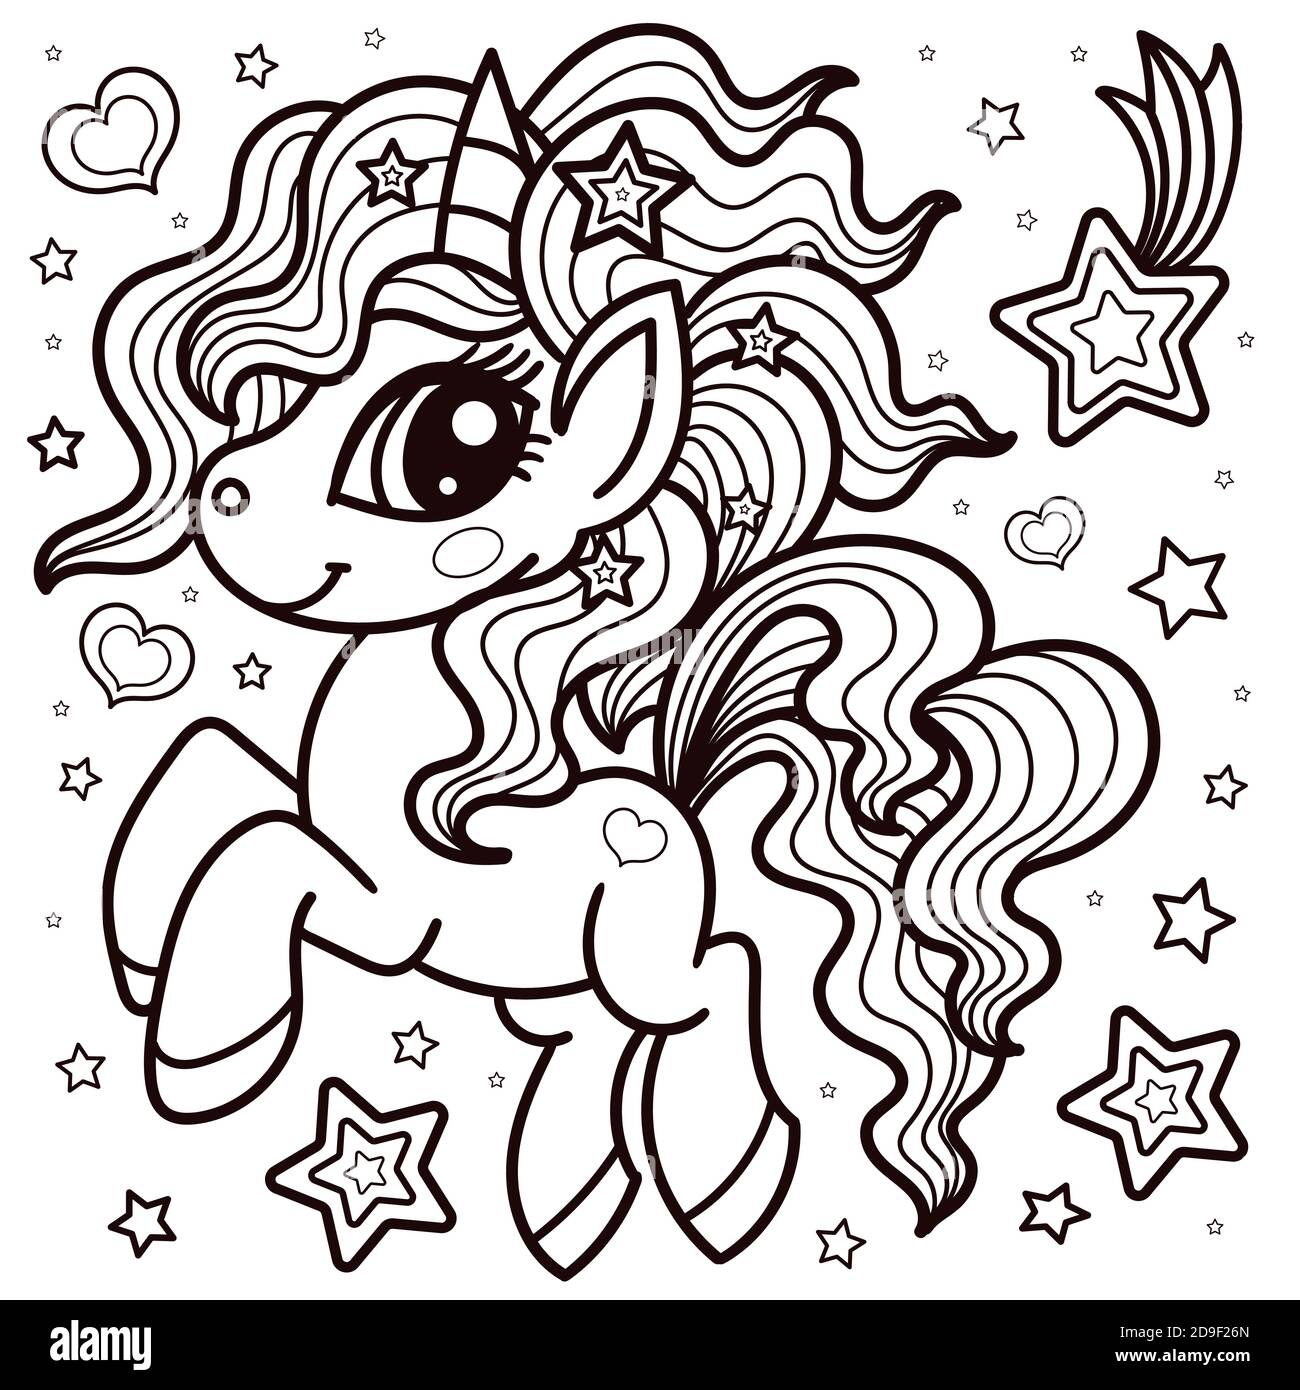 Cute little unicorn. Black and white image. Fantastic animal. For design. coloring books, prints, posters, stickers, tattoos, postcards, etc. Vector i Stock Vector